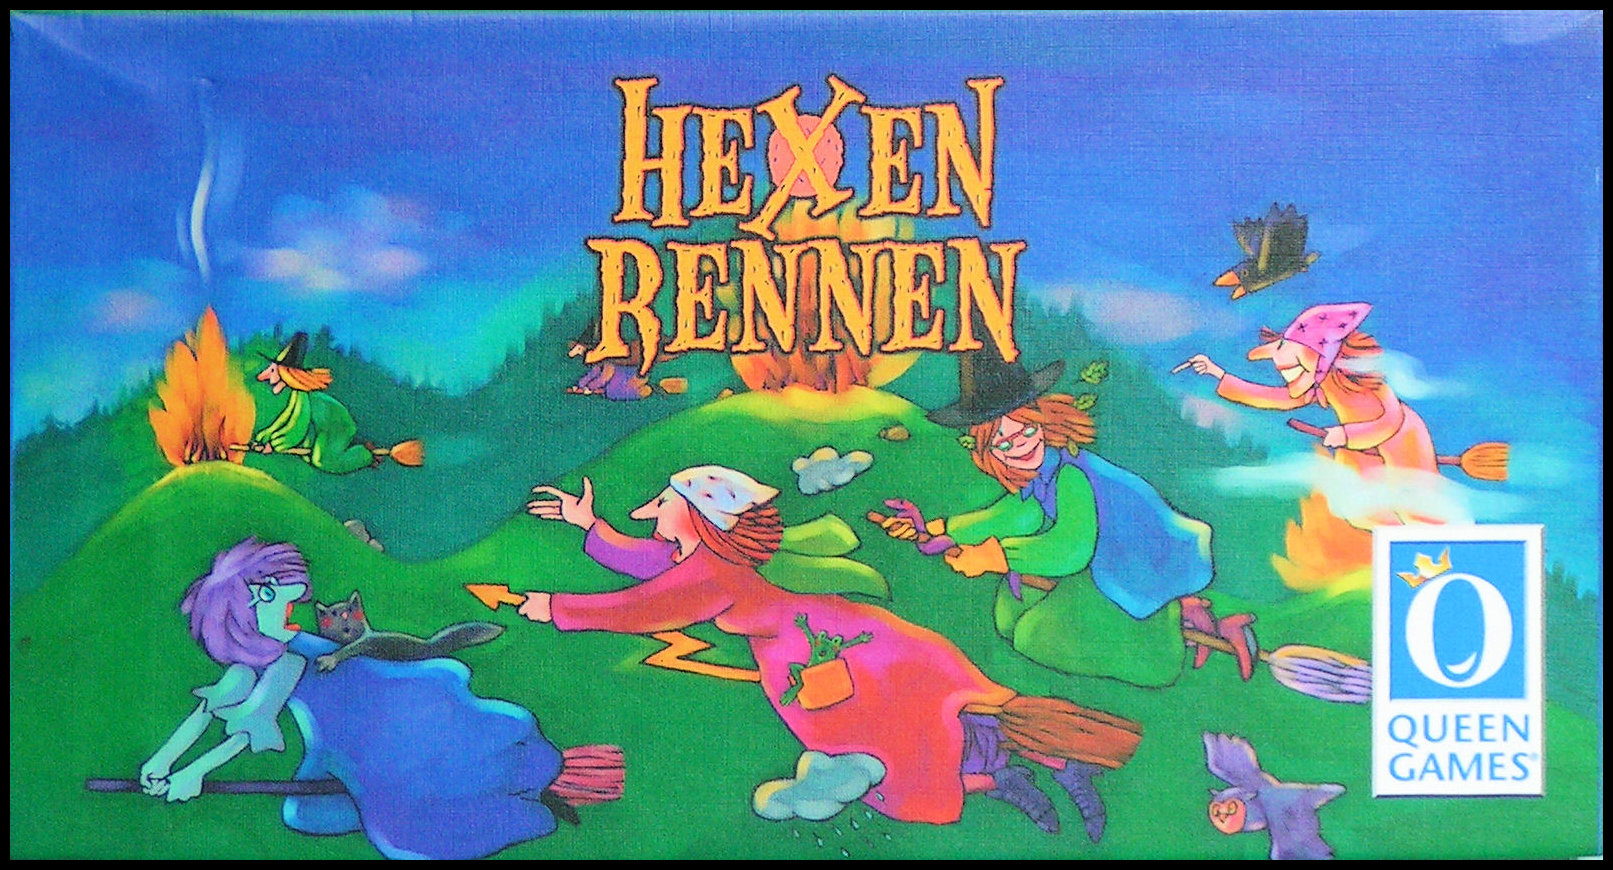 Hexen Rennen - Box Side With Full View Of Wraparound Box Image